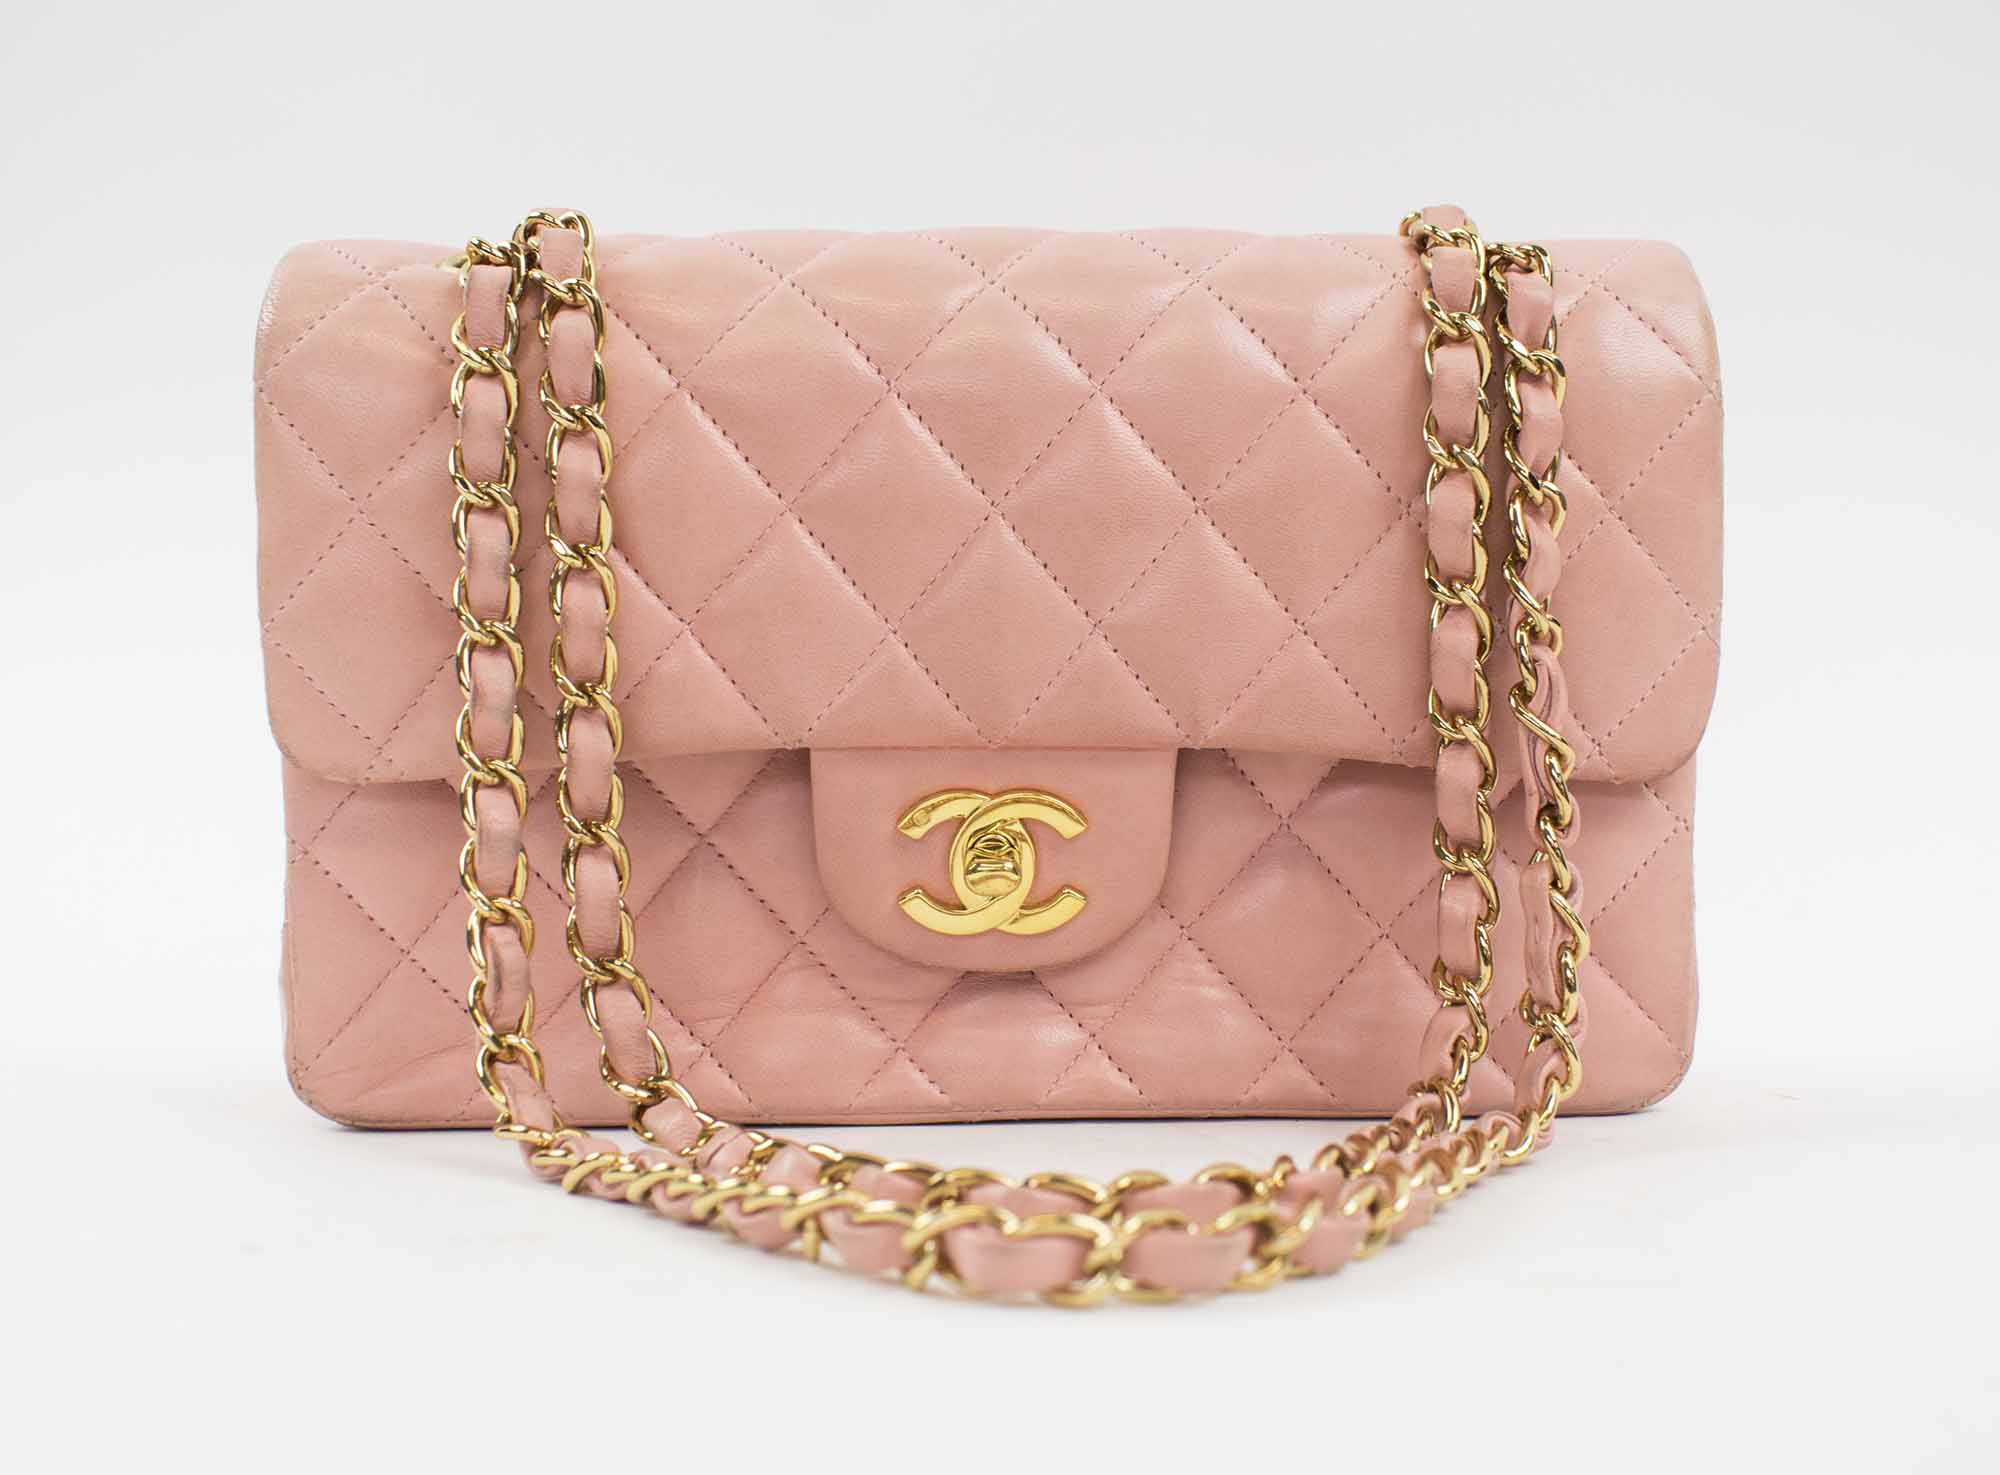 CHANEL SMALL CLASSIC FLAP HANDBAG, with quilted pink leather with  interlocked CC lock, gold tone hardware and leather woven chain strap,  authenticity card 9508026, with dust bag and box, 23cm x 6,5cm